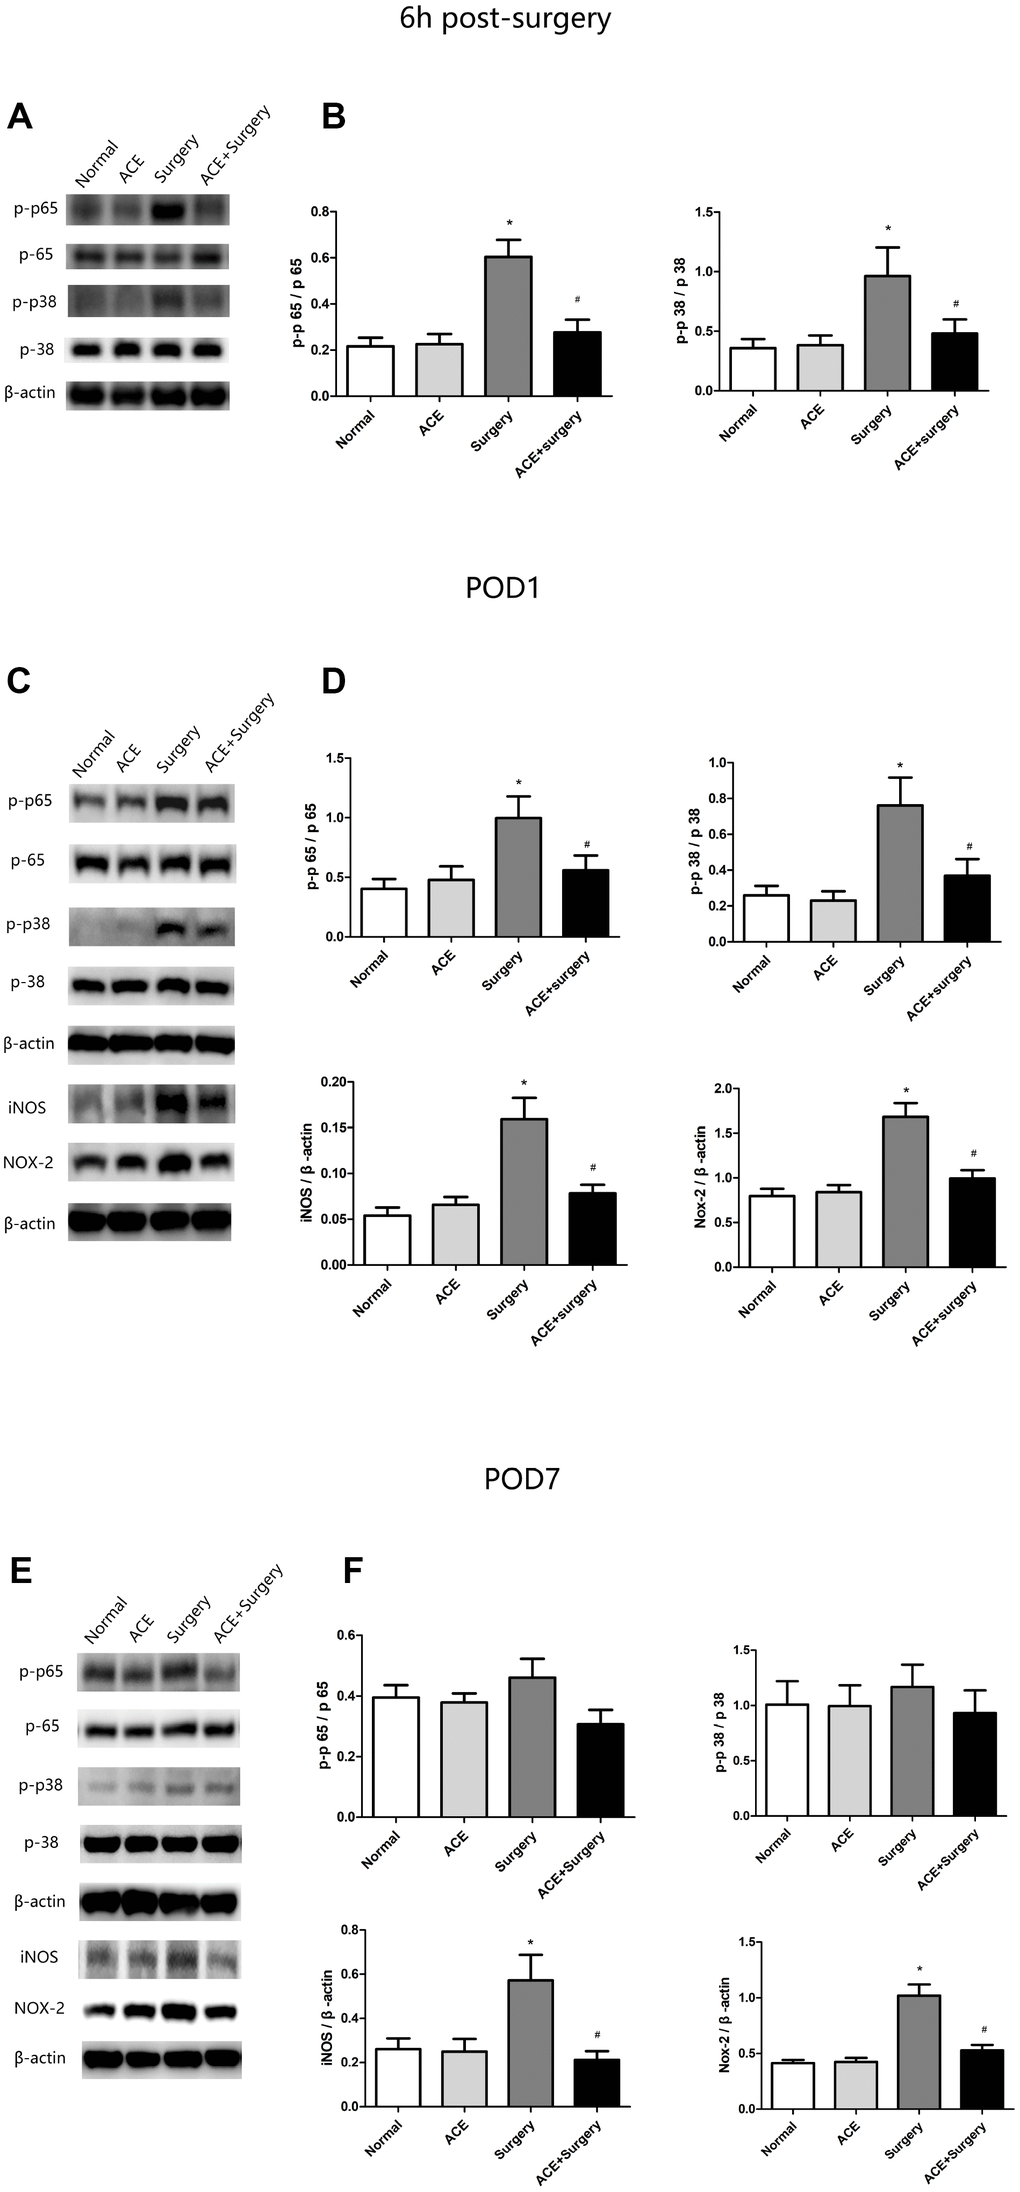 Changes in inflammatory signaling pathways and oxidative stress markers (n=8). (A) Representative bands display p-p65 and p-p38 protein levels 6 h post-surgery. (B) Bar graphs depict the relative quantification of p-p65/p65 and p-p38/p38. (C) Representative bands display p-p65, p-p38, iNOS and NOX2 protein levels on POD 1. (D) Bar graphs depict the relative quantification of p-p65/p65, p-p38/p38, iNOS/β-actin and NOX2/β-actin on POD 1. (E) Representative bands display the protein levels of the above indicators on POD 7. (F) Bar graphs depict the relative quantification of these indicators on POD 7. Data are expressed as the mean±SEM, *P